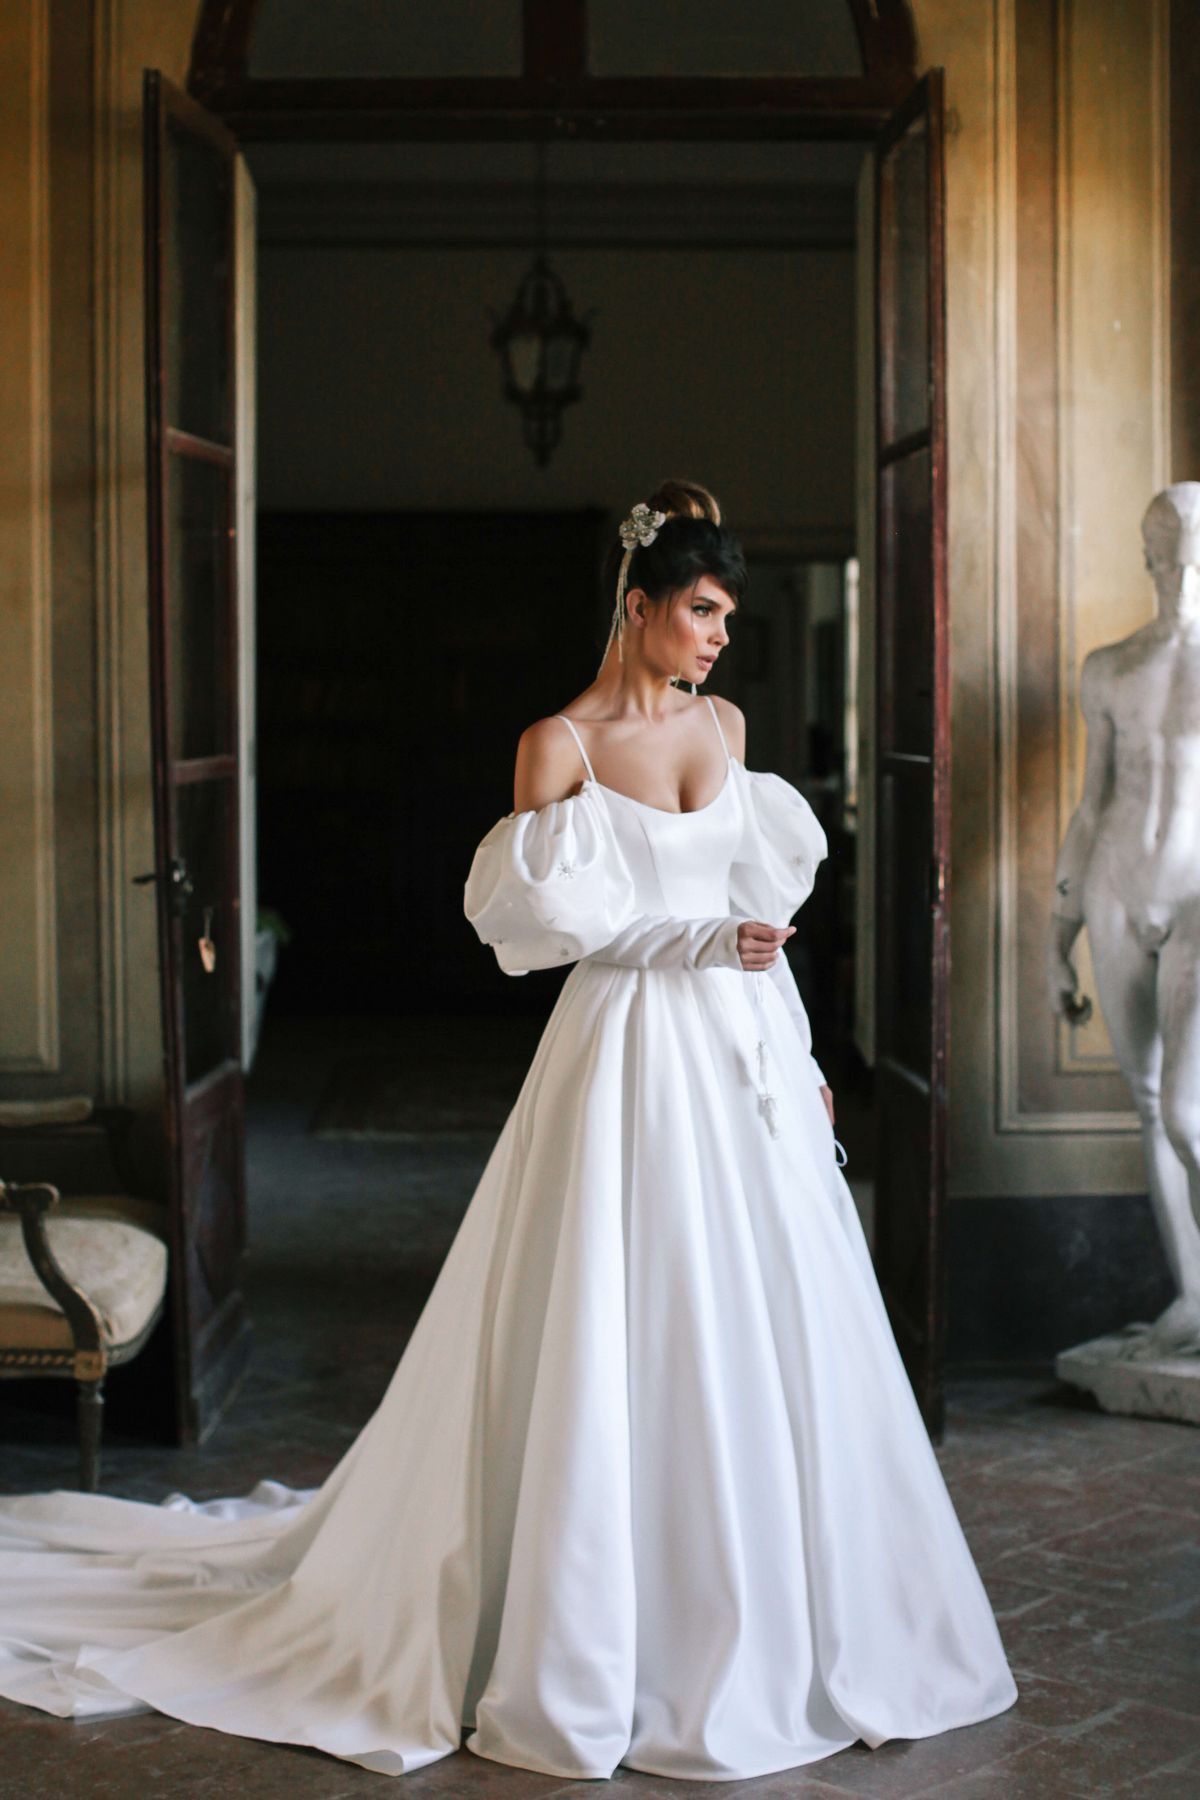 Itan wedding dress by rara avis with white satin fabric and off shoulders long sleeves at Dell'Amore Bridal, Auckland, NZ. 10